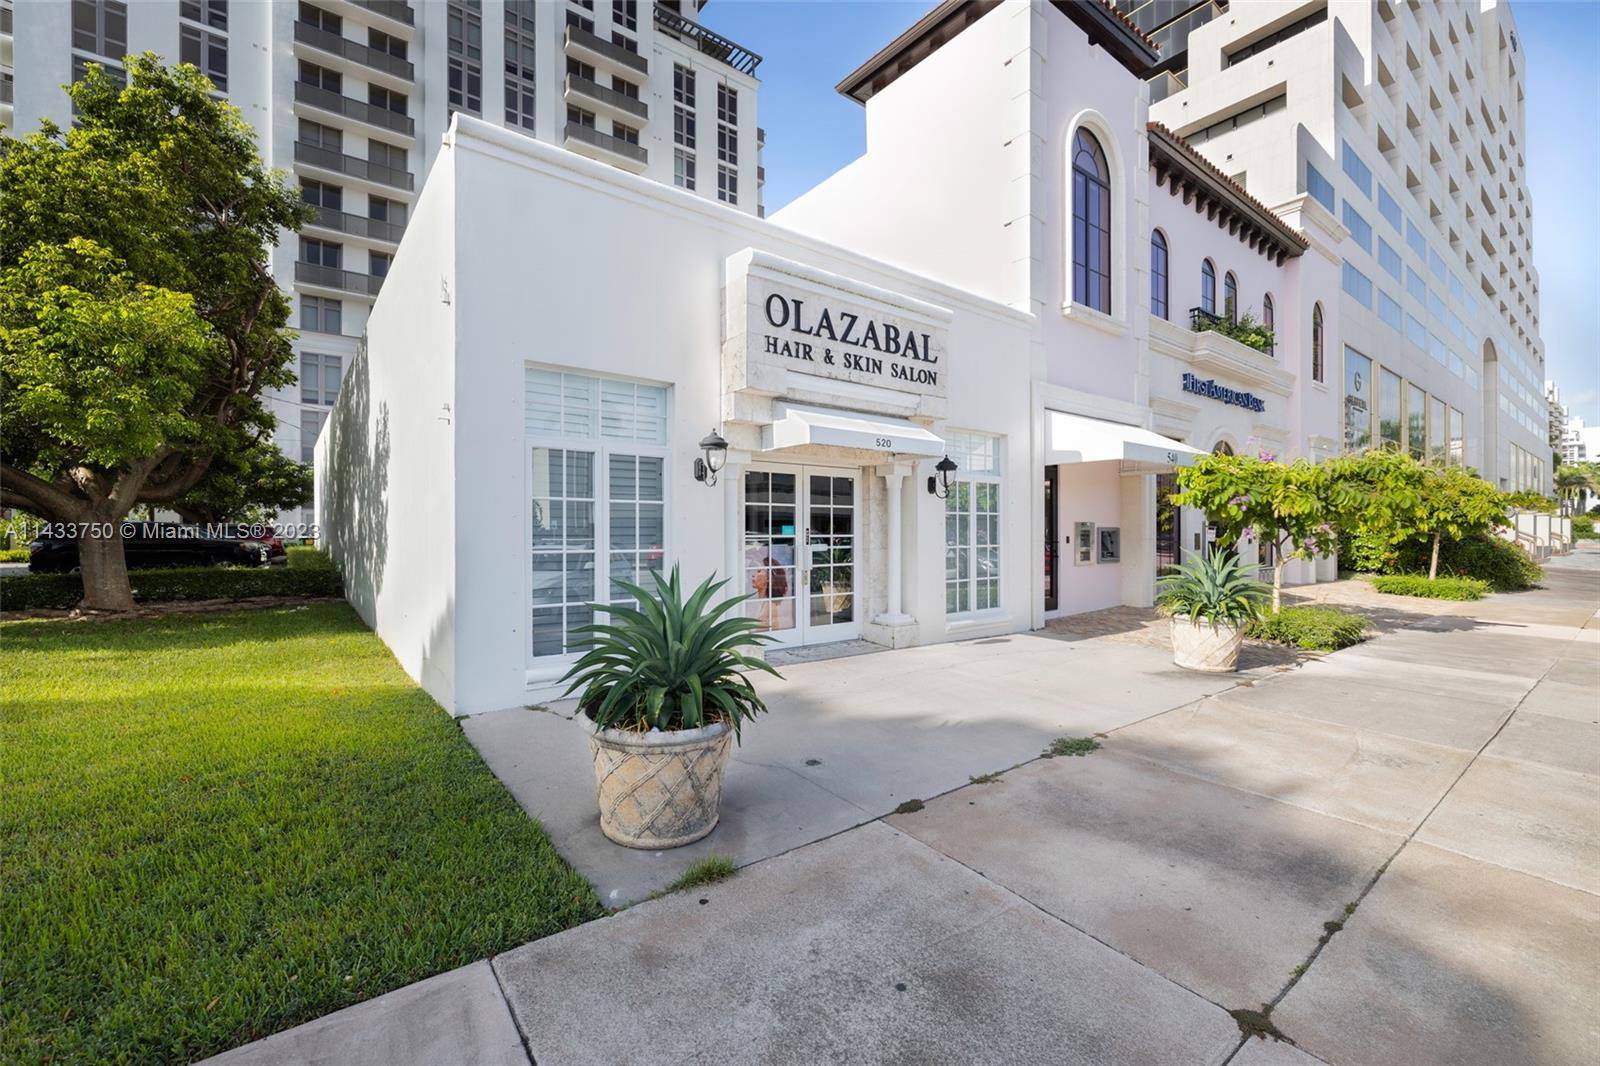 Remarkable opportunity in the heart of Coral Gables an exquisite commercial building on the prestigious Biltmore Way.